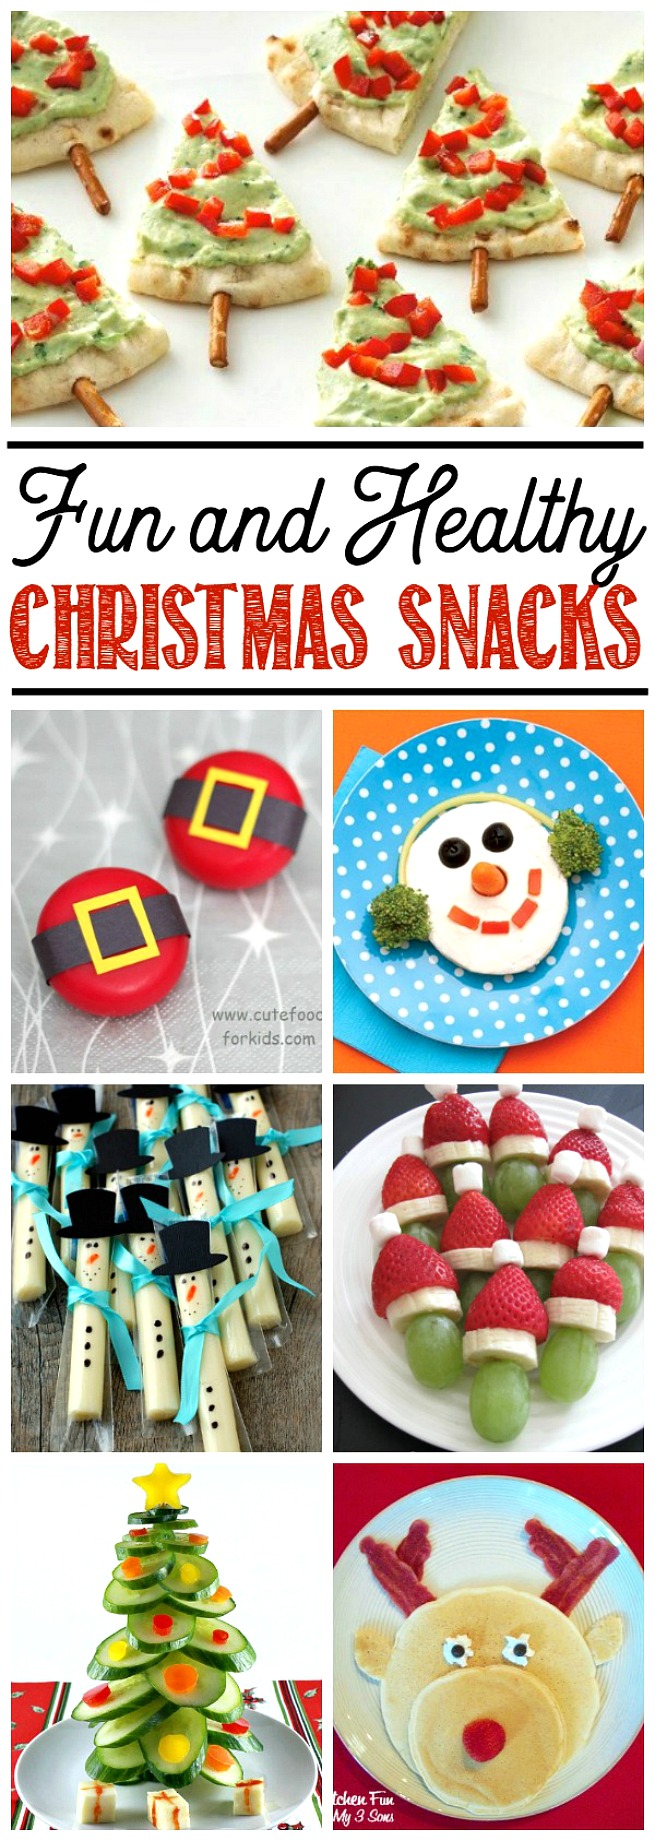 Awesome ideas for healthy Christmas snacks! Great for class parties or as an alternative to all of that holiday sugar!